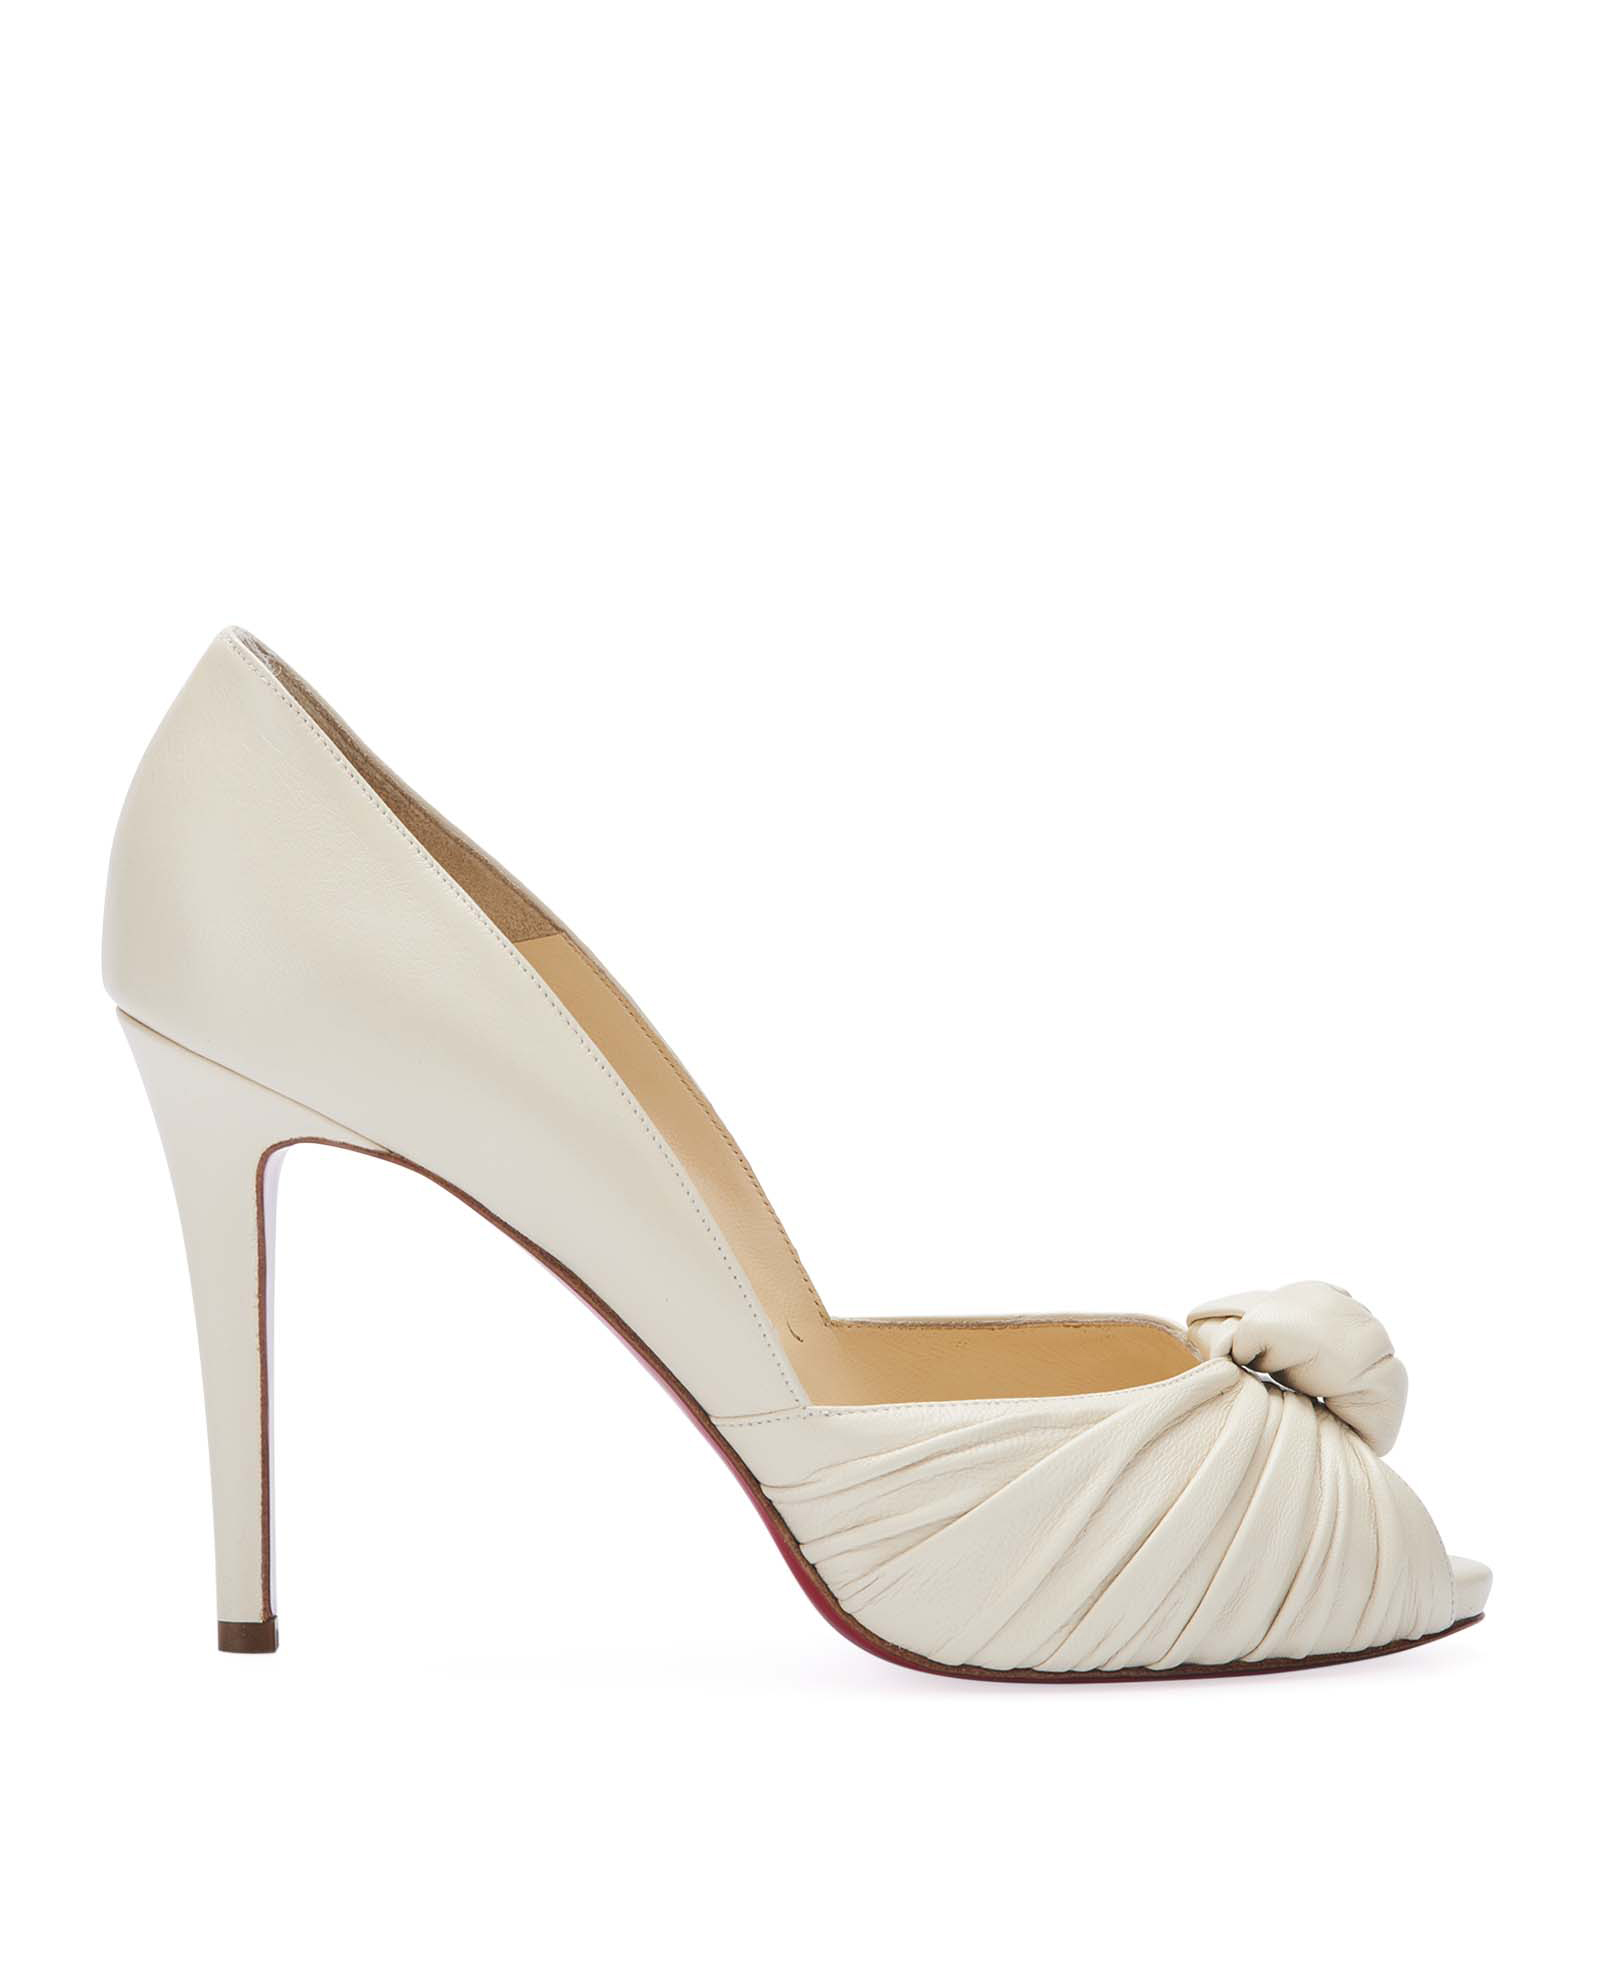 Low Heeled Wedding Shoes for Tall Brides Sparkly Christian Louboutin